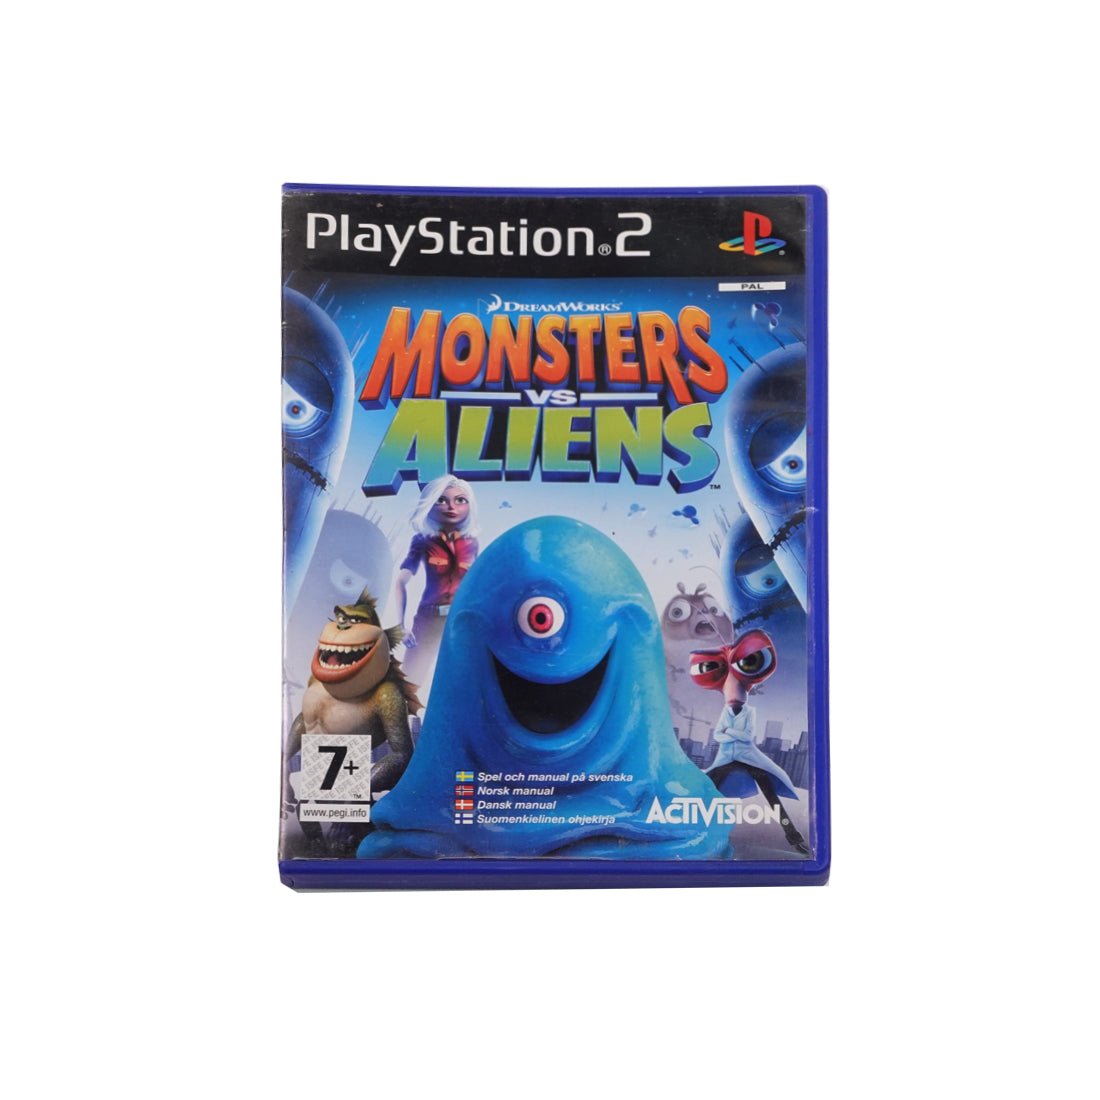 (Pre-Owned) Monsters Vs Aliens - PlayStation 2 - Store 974 | ستور ٩٧٤